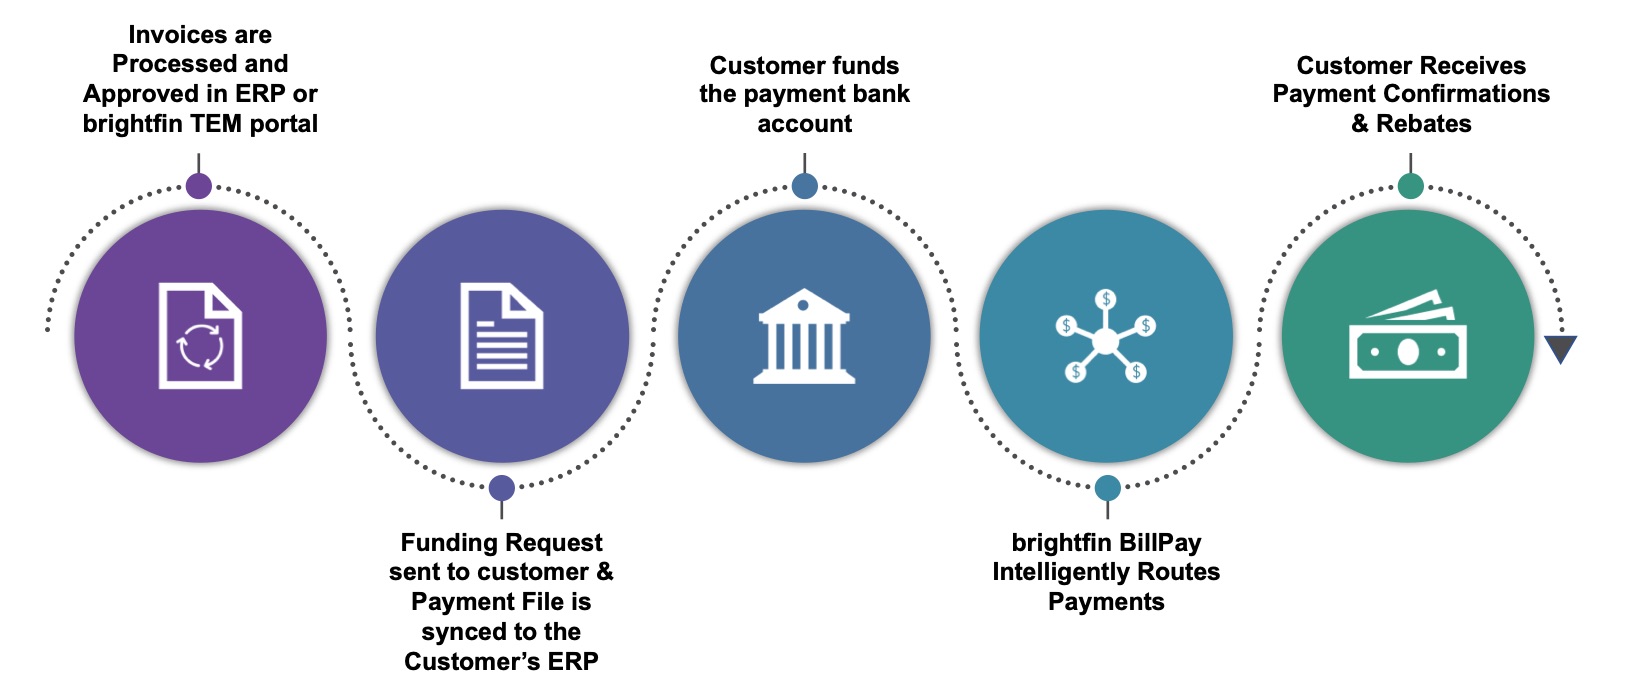 brightfin Bill Pay How it Works